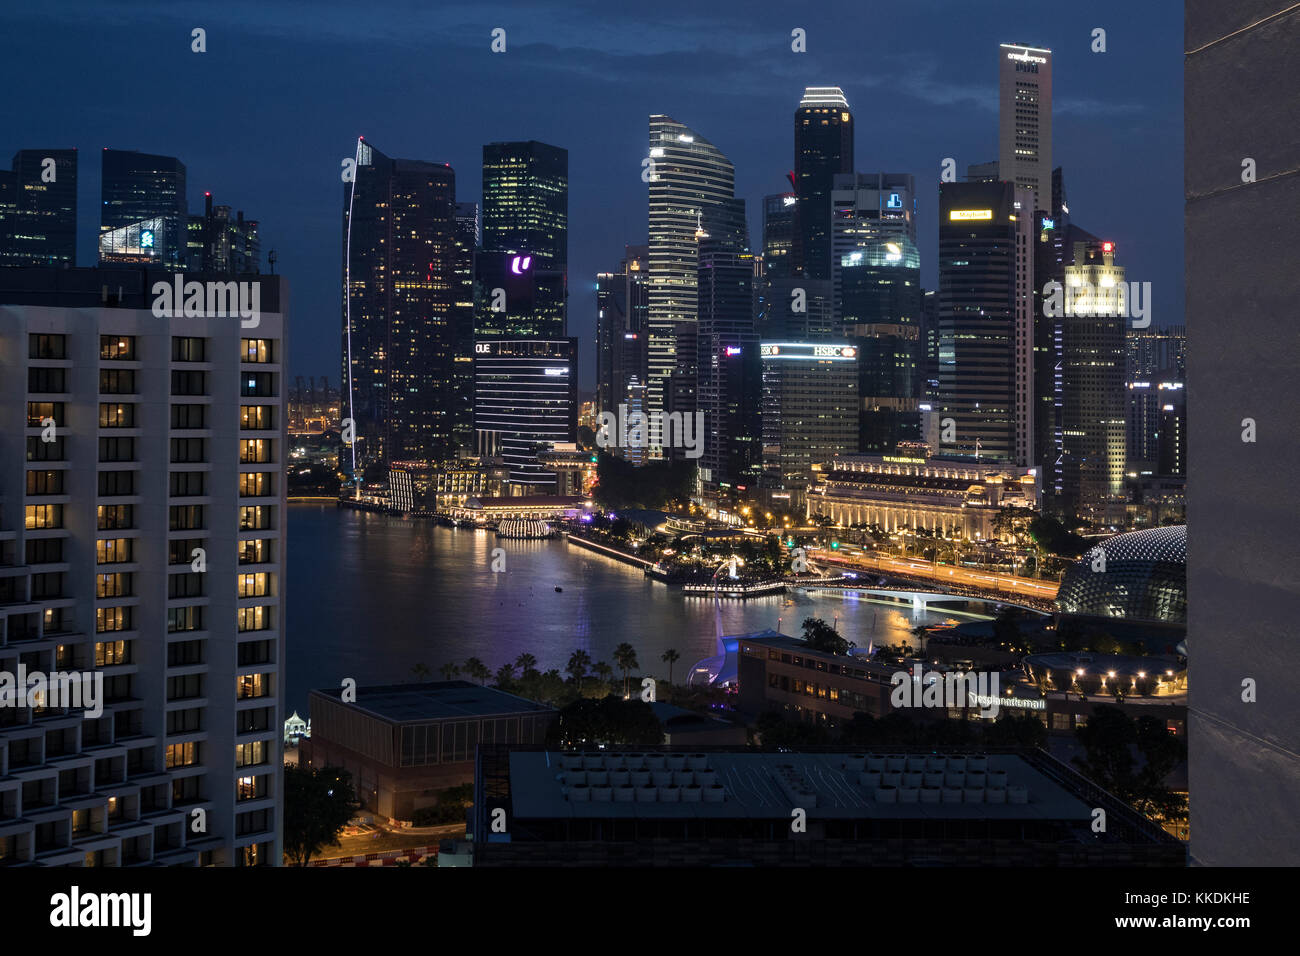 Dusk shot of  the Marina Bay area in Singapore, taken from the Pan Pacific Hotel showing the Singapore skyline at night Stock Photo